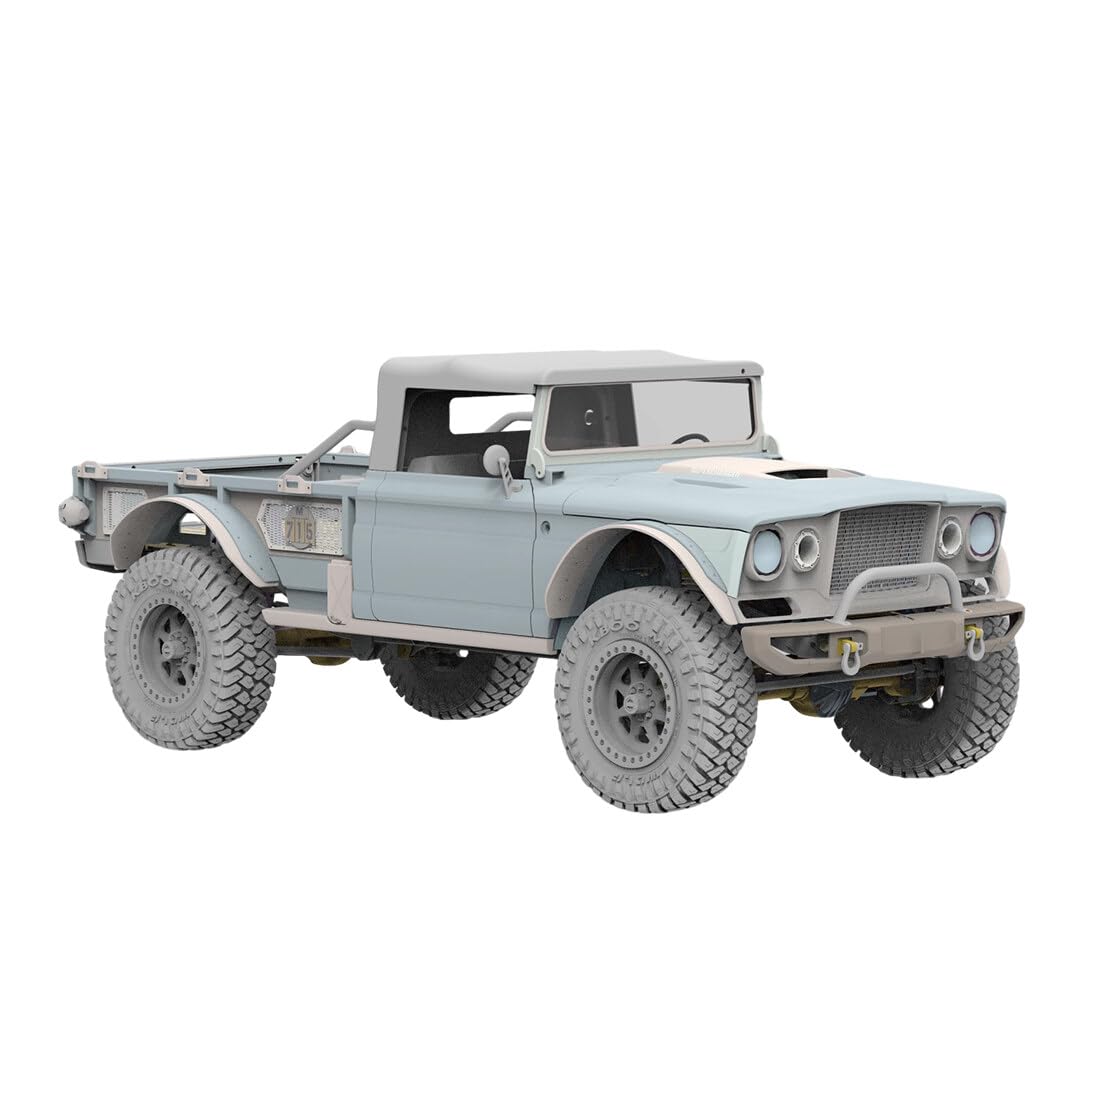 Newcomer 1/8 2.4G RC 4WD All-Metal Off-Road Climbing Pickup Truck Chassis Model, Racing Car Model Halloween Christmas Surprising Gift for Kids (KIT Version)